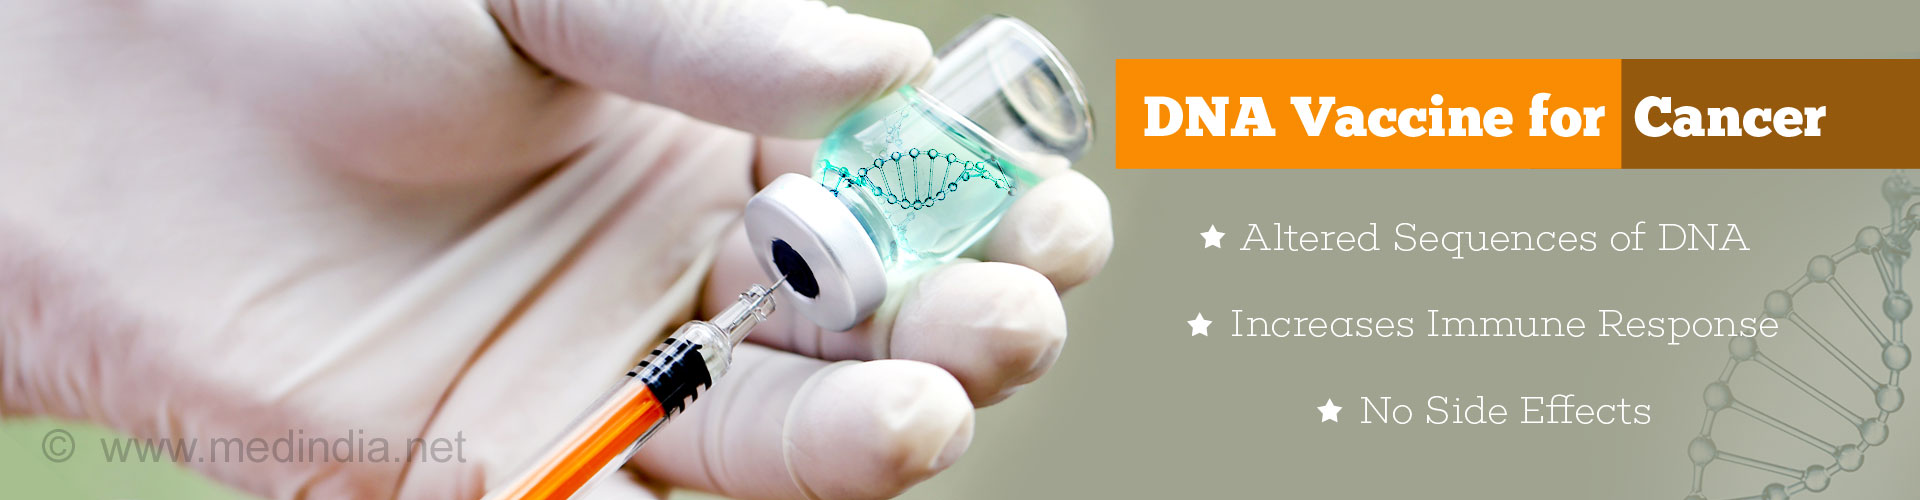 DNA vaccine for cancer
- altered sequences of DNA
- increases immune response
- no side effects
